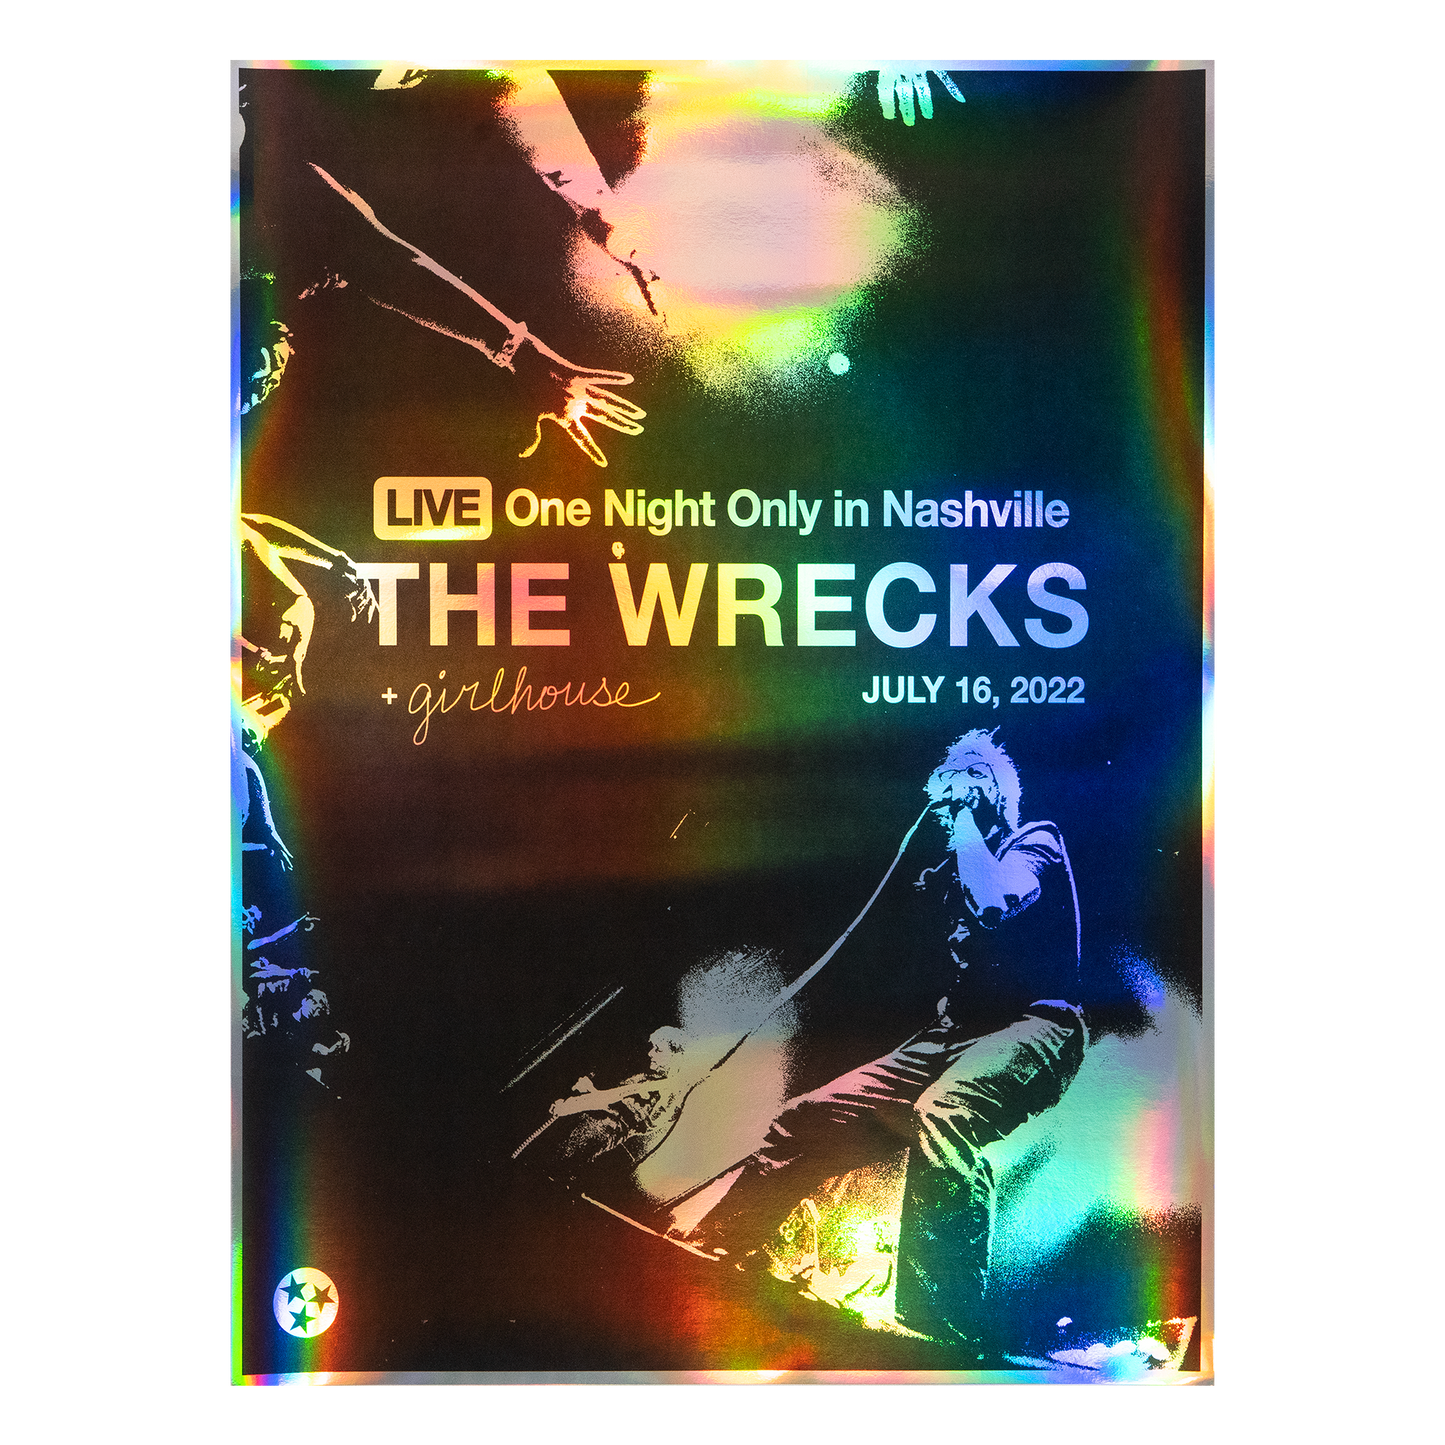 The Wrecks One Night Only The Wrecks Live In Nashville,TN 18" x 24" Holographic Poster